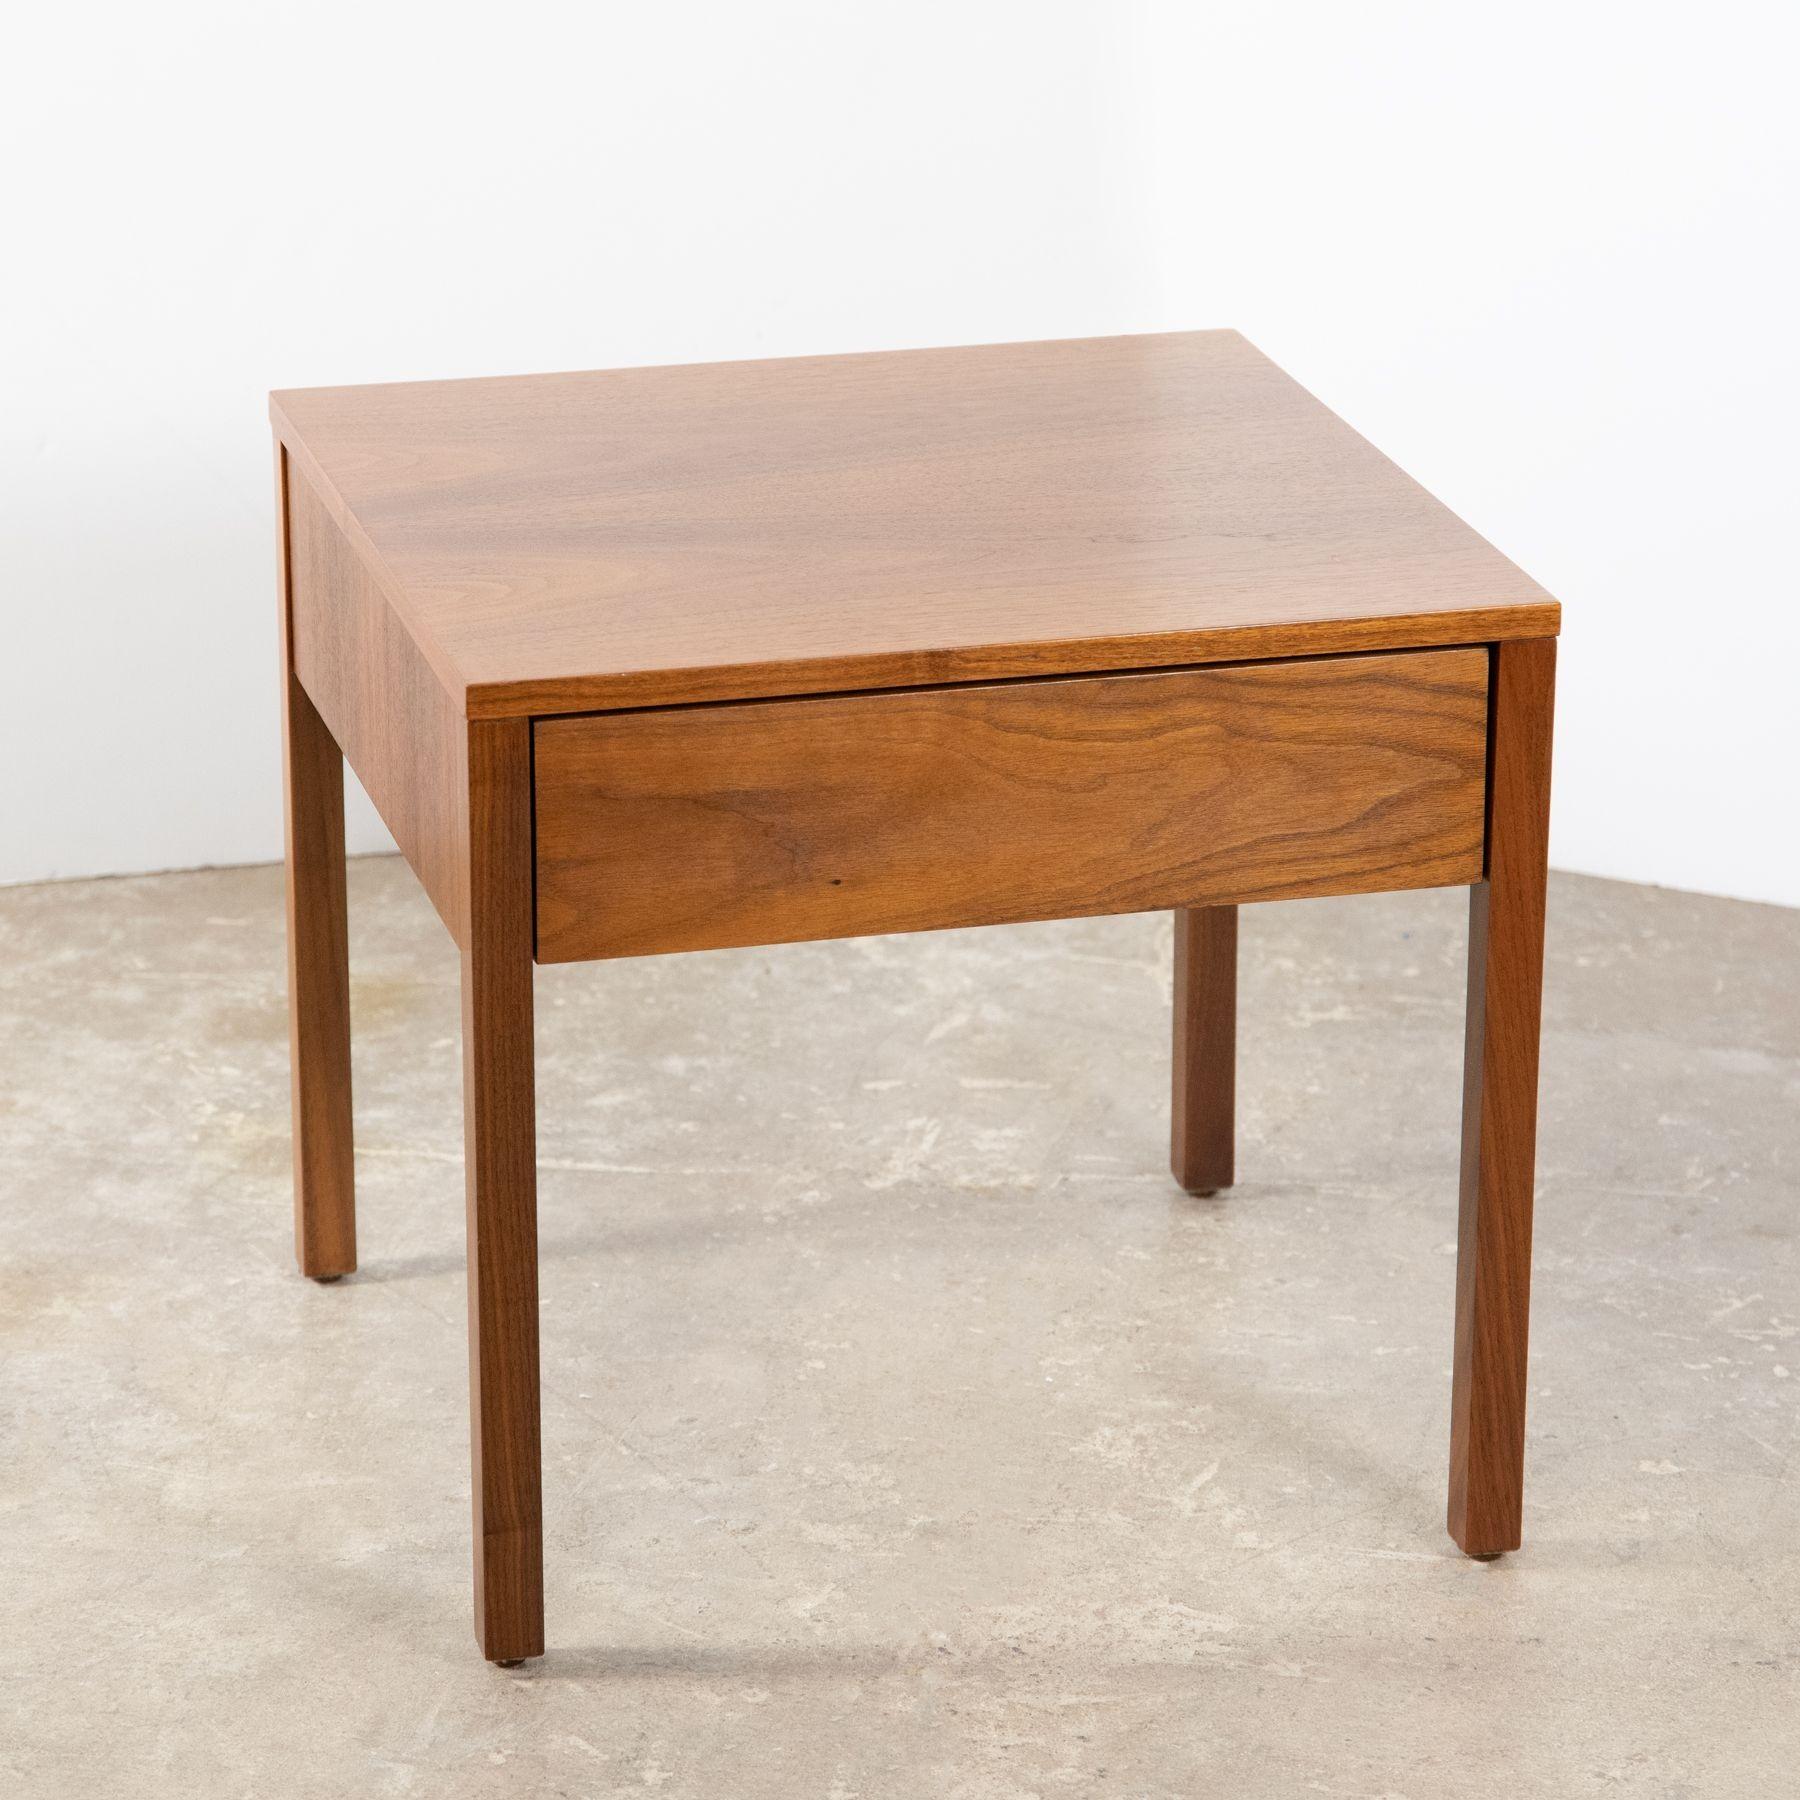 20th Century Florence Knoll Nightstands in Walnut for Knoll Associates Early Production